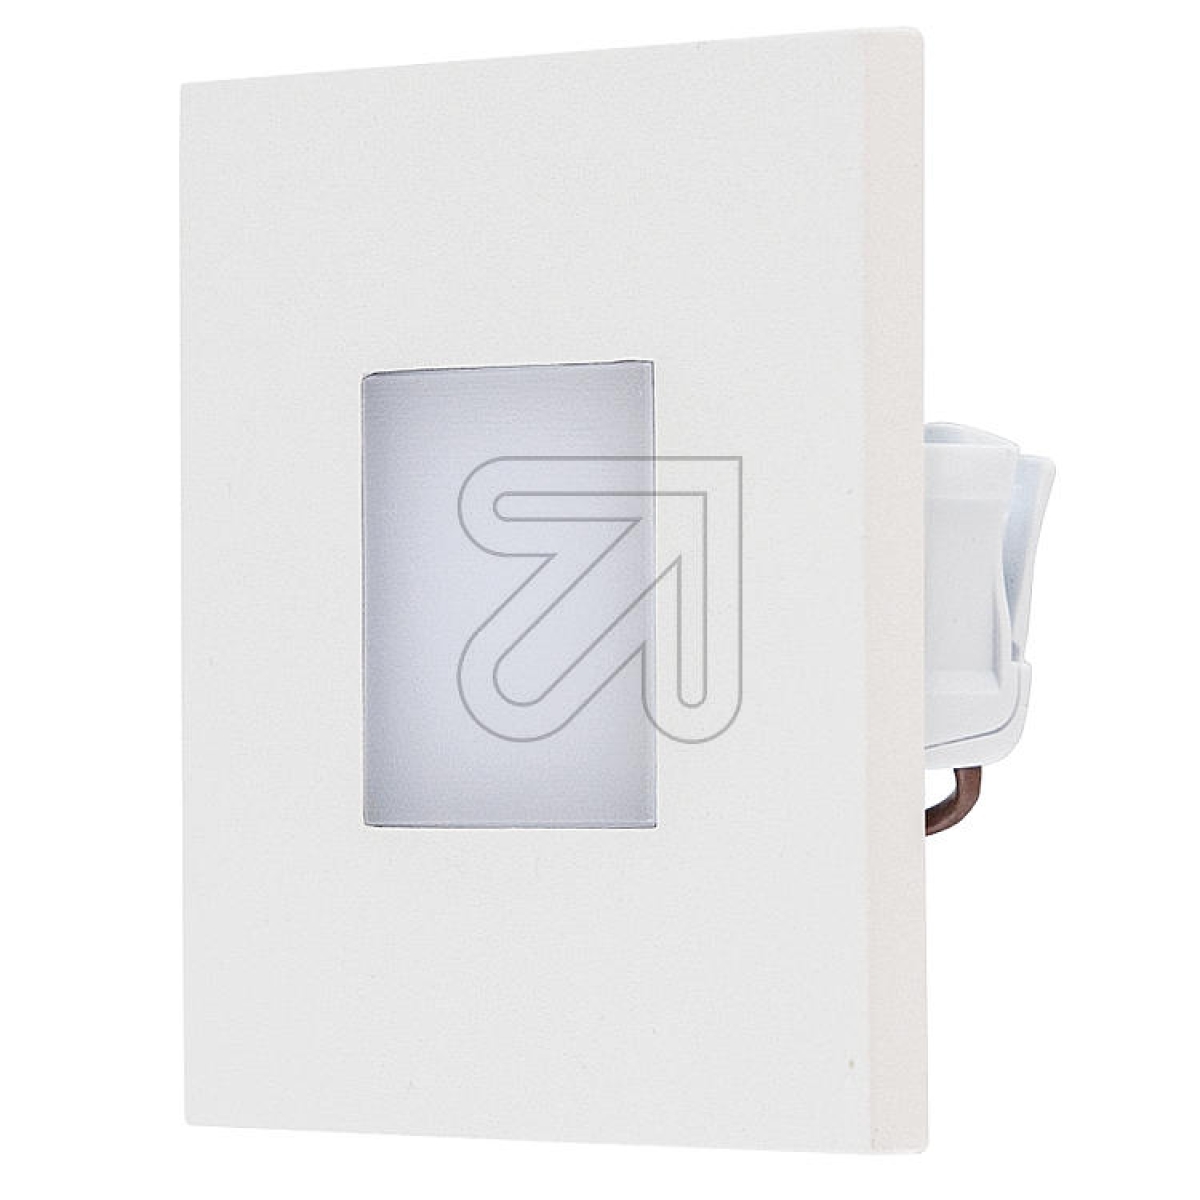 EVNLED recessed wall light IP44, 1.8W 4000K, white 230V, 65lm, stainless steel, square, LQ41840WArticle-No: 650355